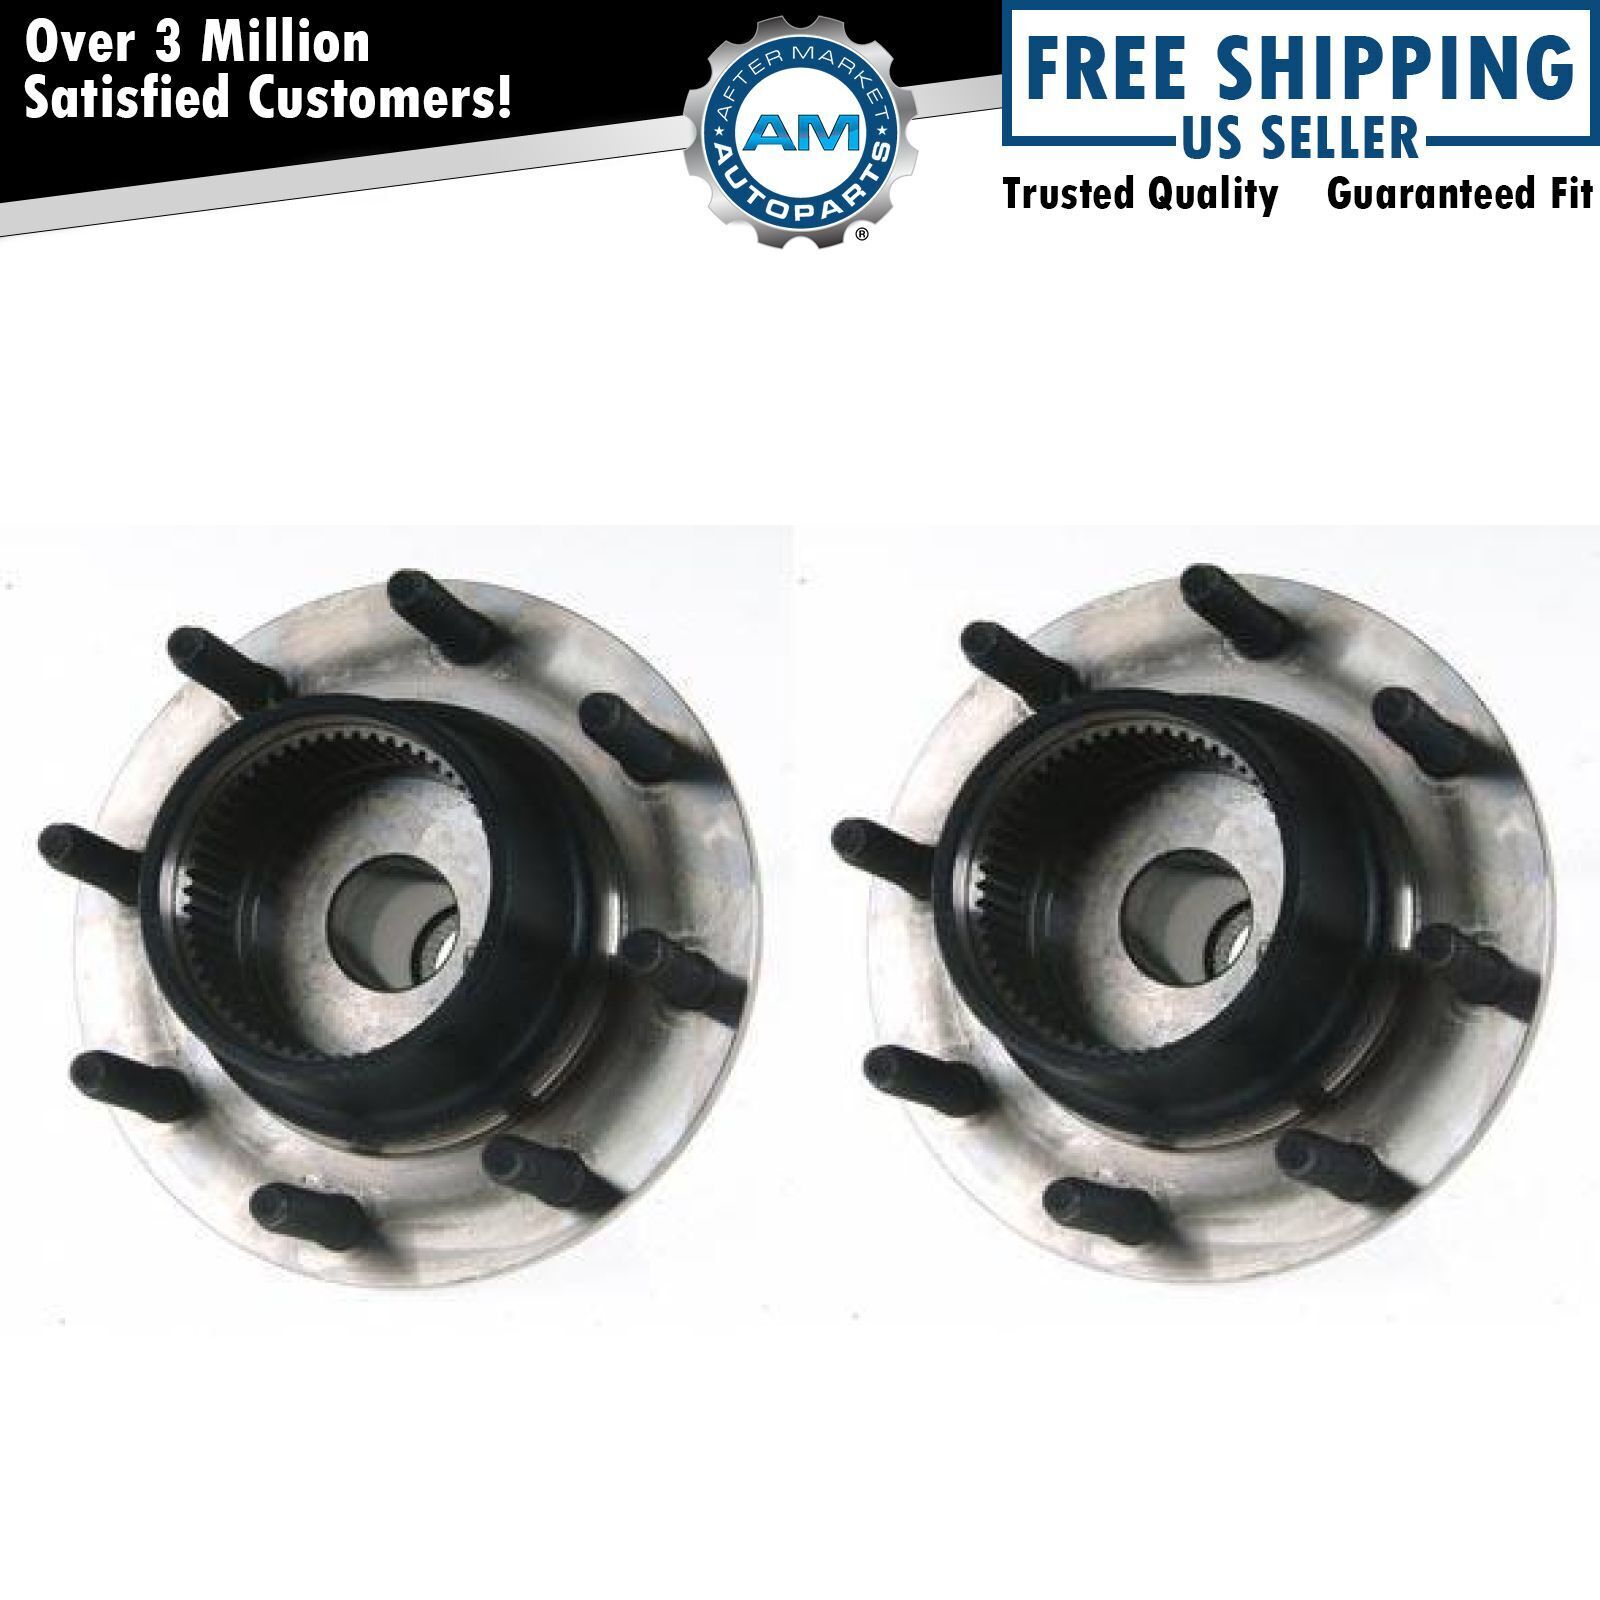 FRONT Wheel Hub Bearing Course Threads No ABS - BEFORE 3/21/99 - SRW 1999 F-250